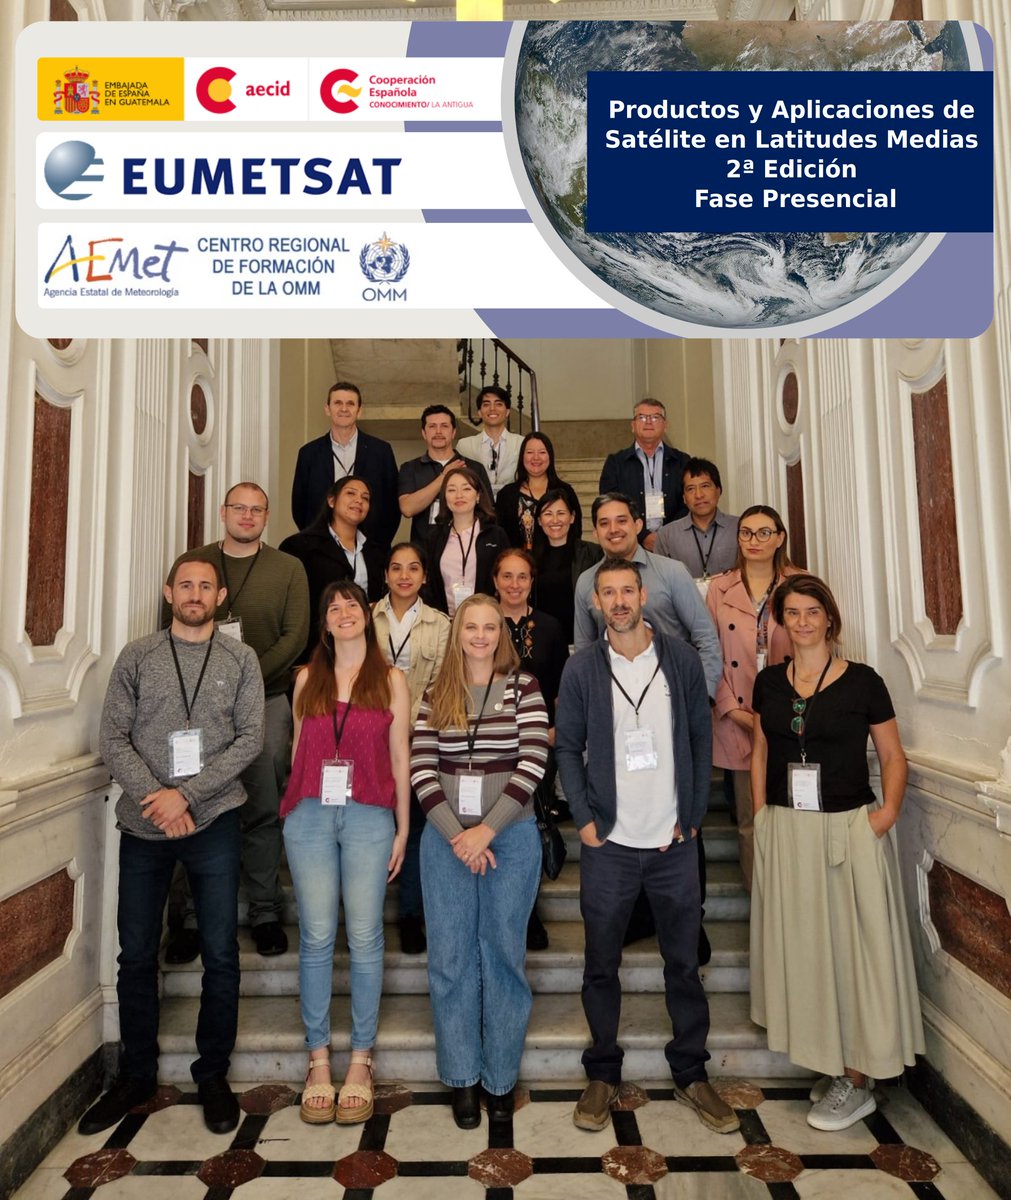 🛰Last week we had a face-to-face training course on 'Meteorological Satellite Products and Applications for Mid-Latitudes' in Montevideo, Uruguay, organized by @AEMET_Esp / @AECID_es and @eumetsat, with participants from Argentina, Brazil, Chile, Mexico, Paraguay and Uruguay📡